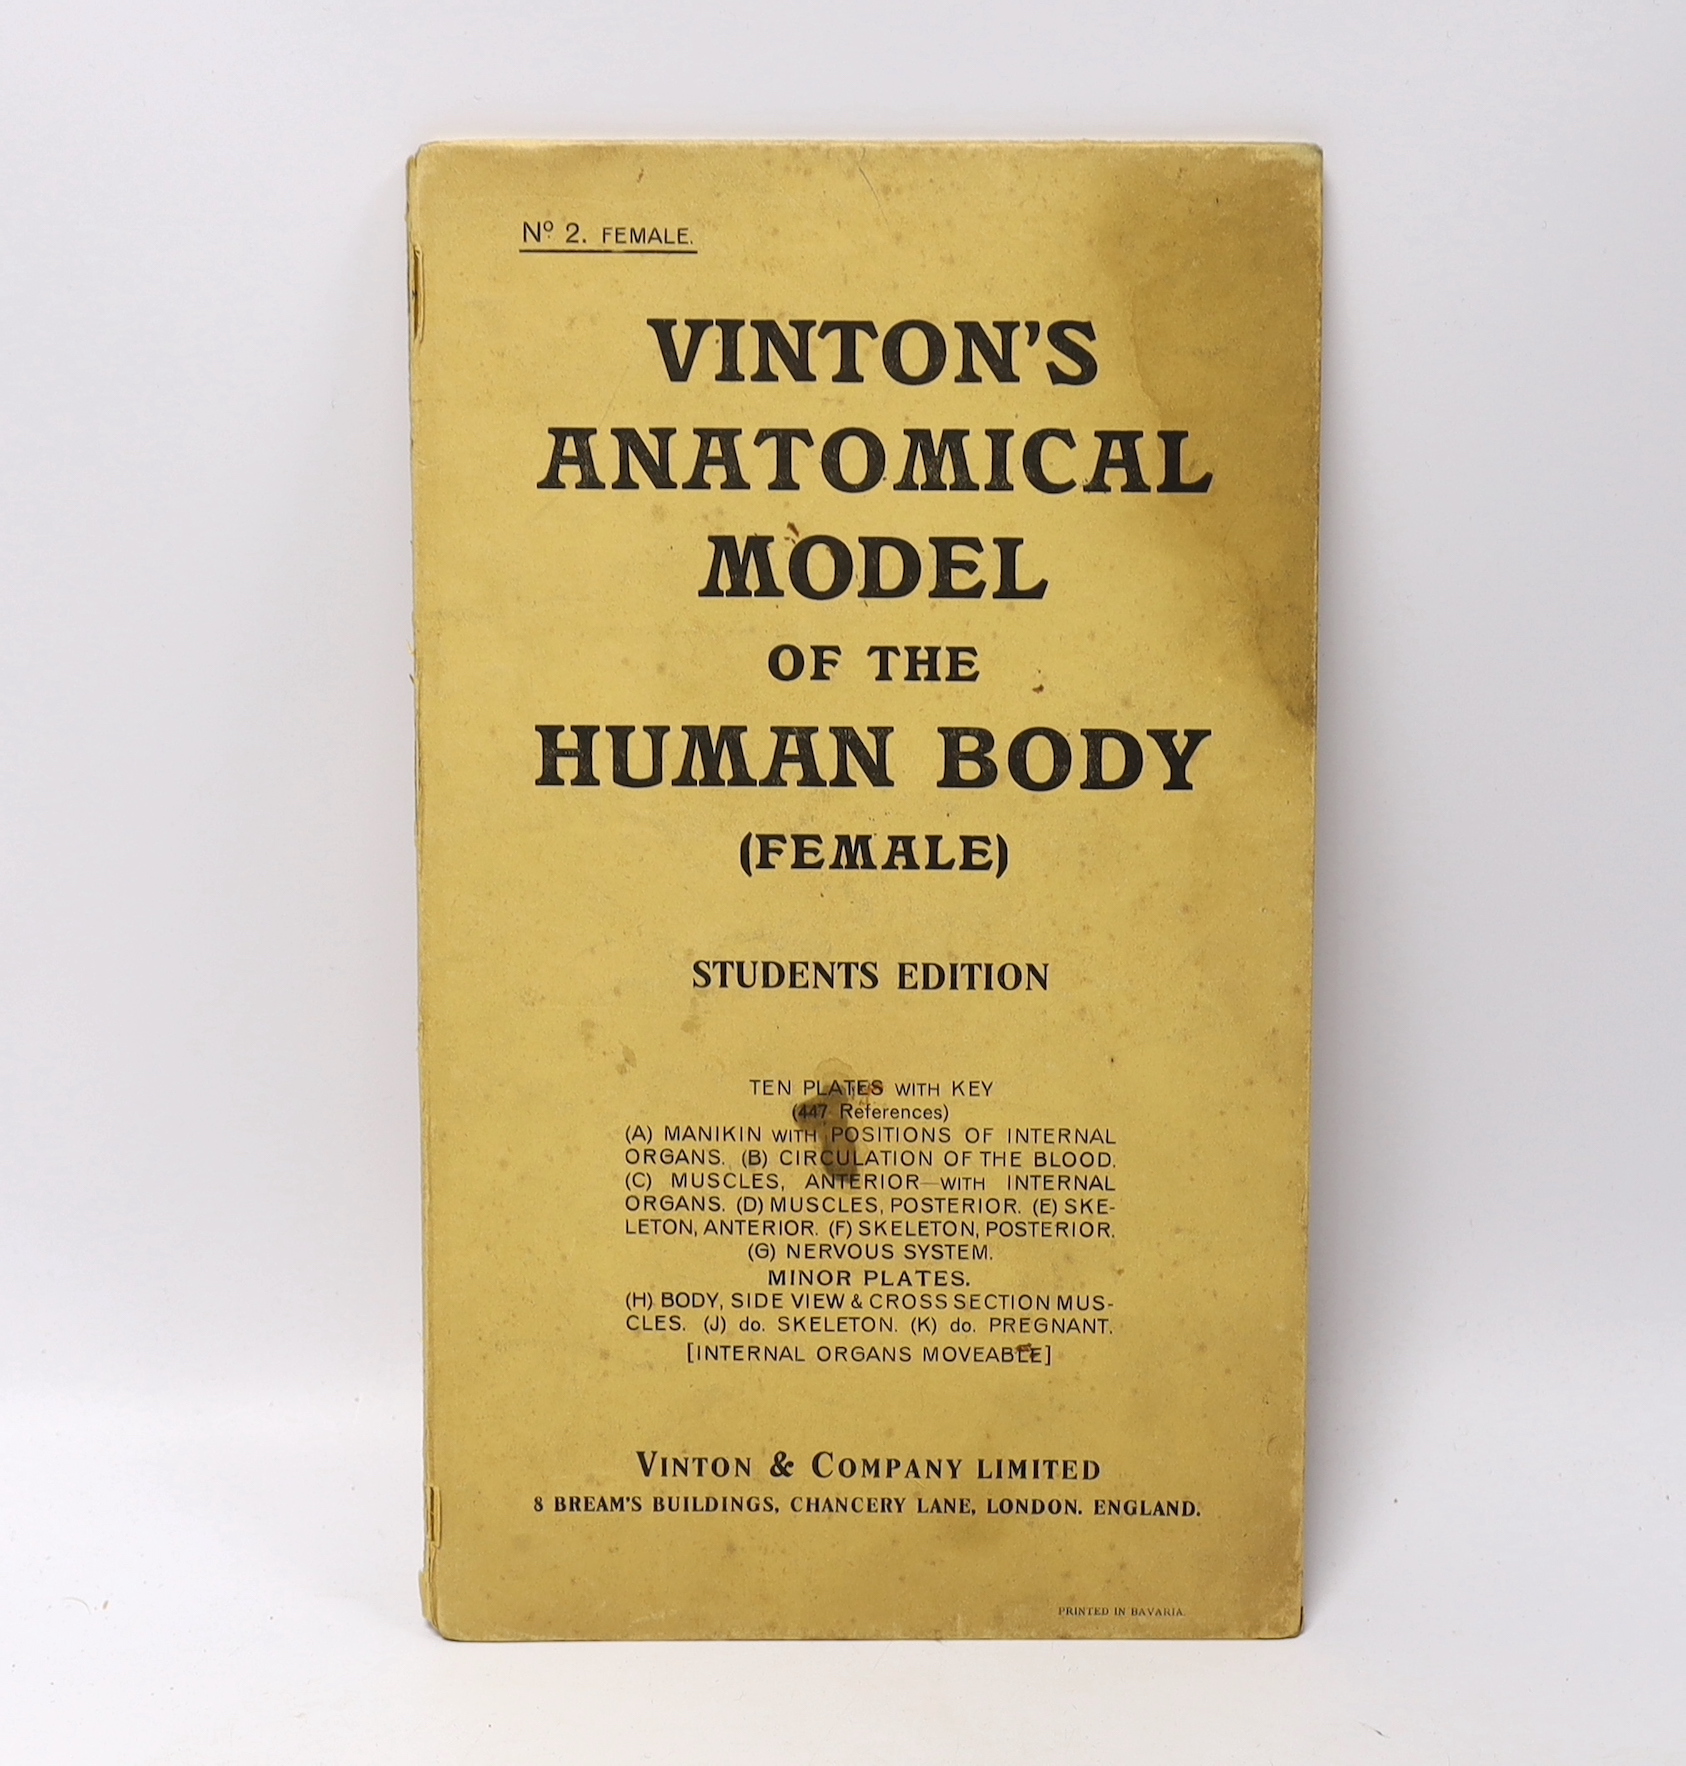 A Vinton's Anatomical Model of the Human Body (Female anatomy), printed in Bavaria by Vinson & Co. Ltd. circa 1910, with coloured fold-out plates, 19.5cm x 33cm